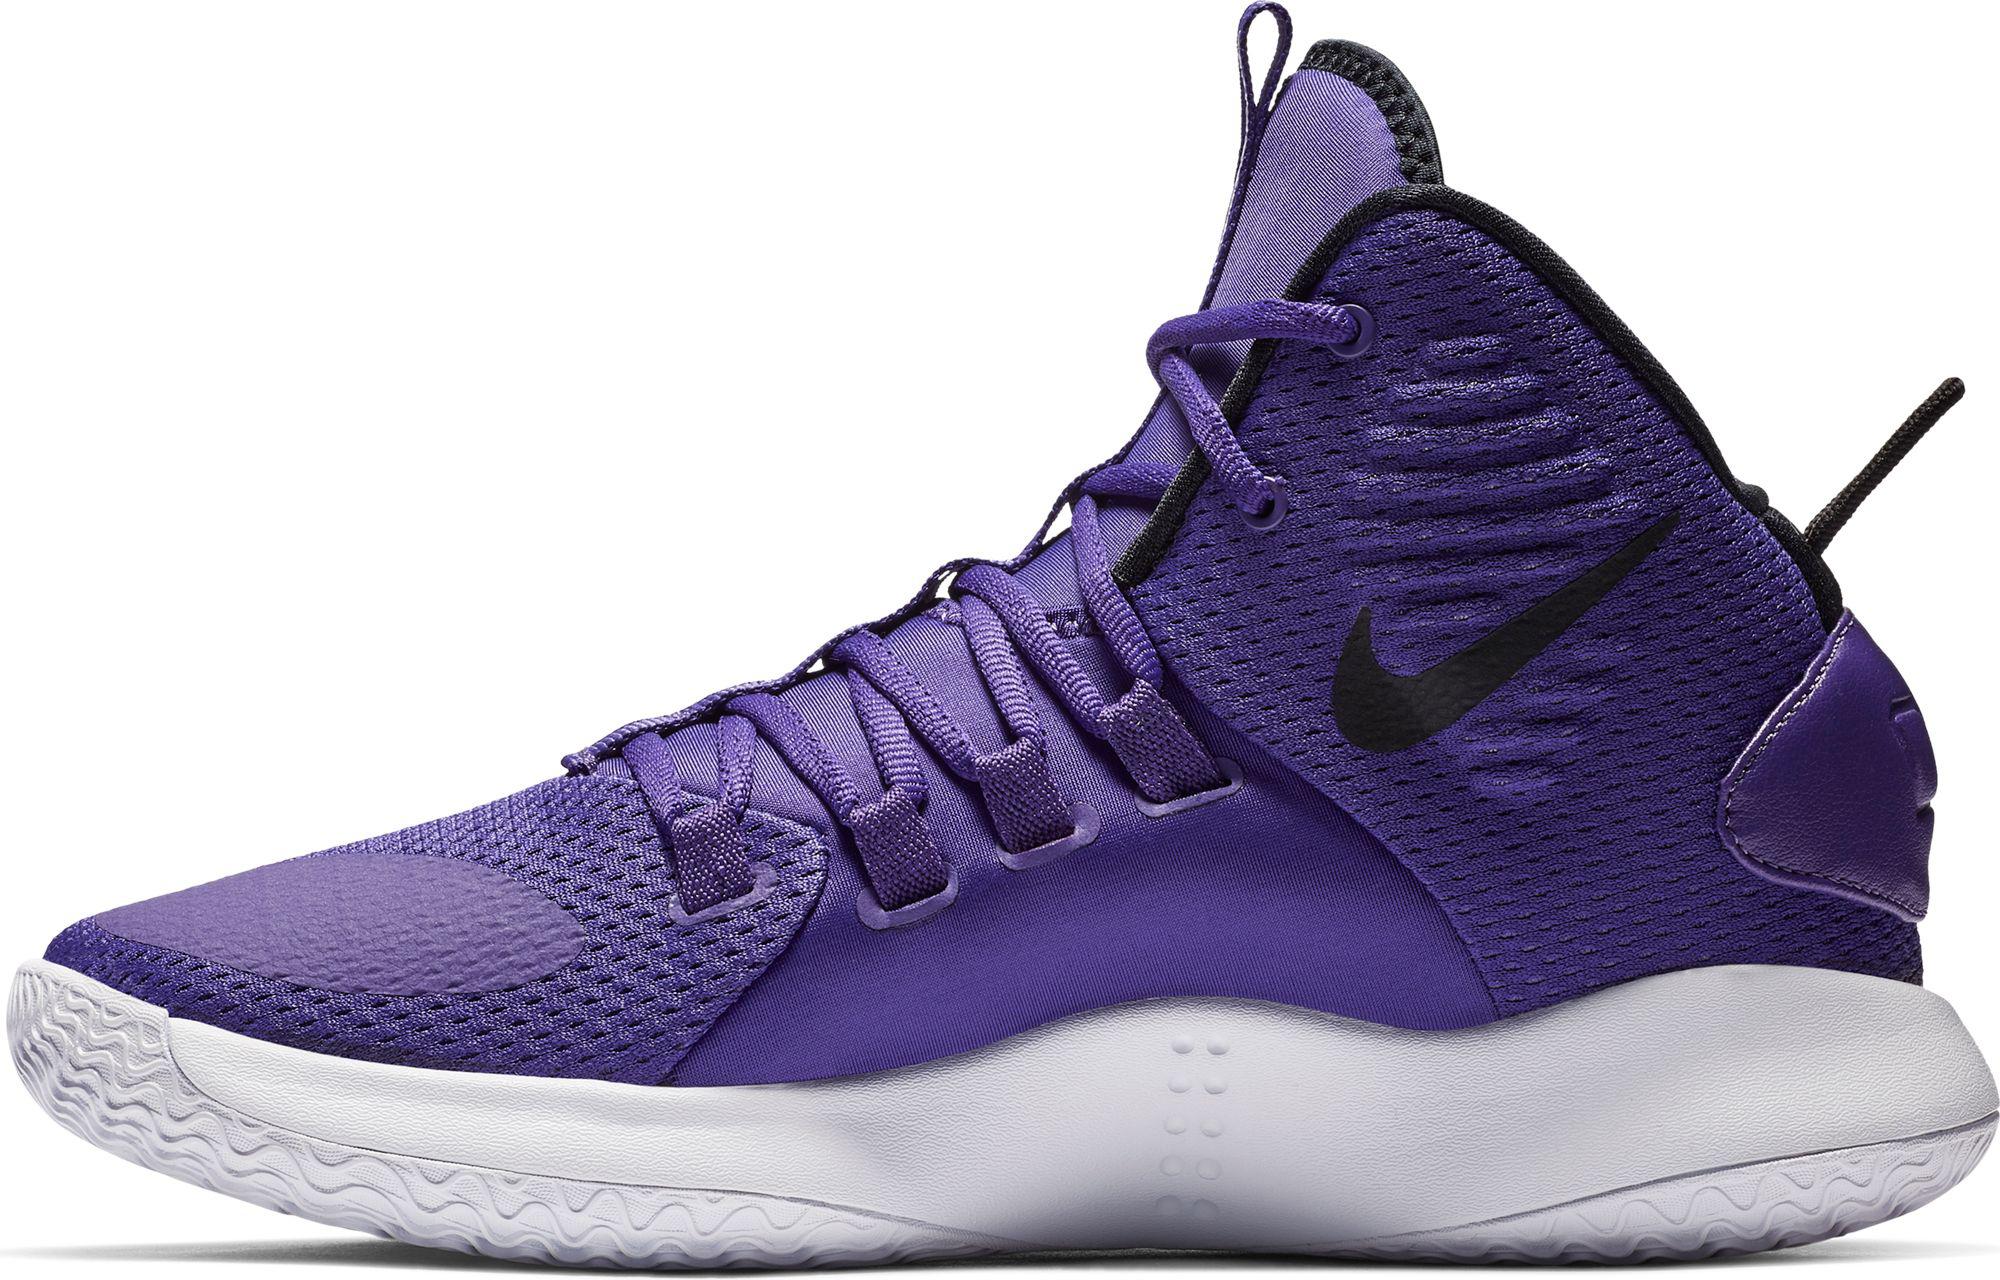 Nike Lace Hyperdunk X Mid Basketball Shoes in Purple/White